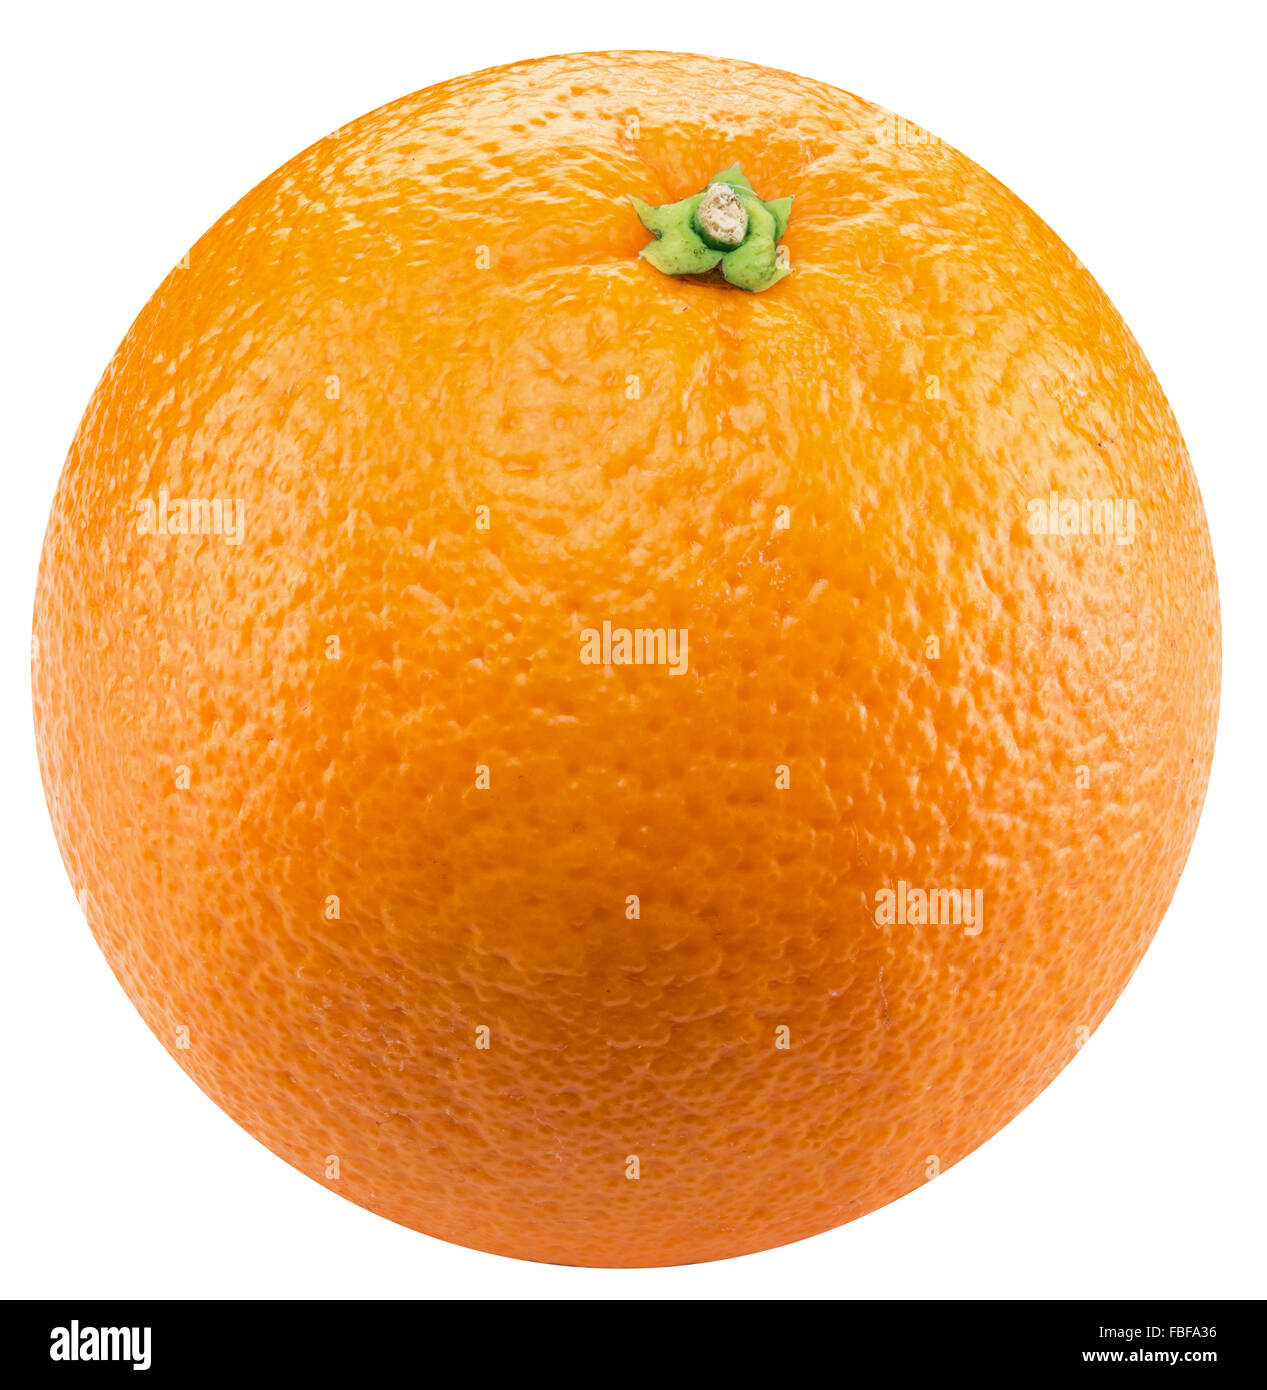 Orange fruit on the white background. File contains clipping paths. Stock Photo